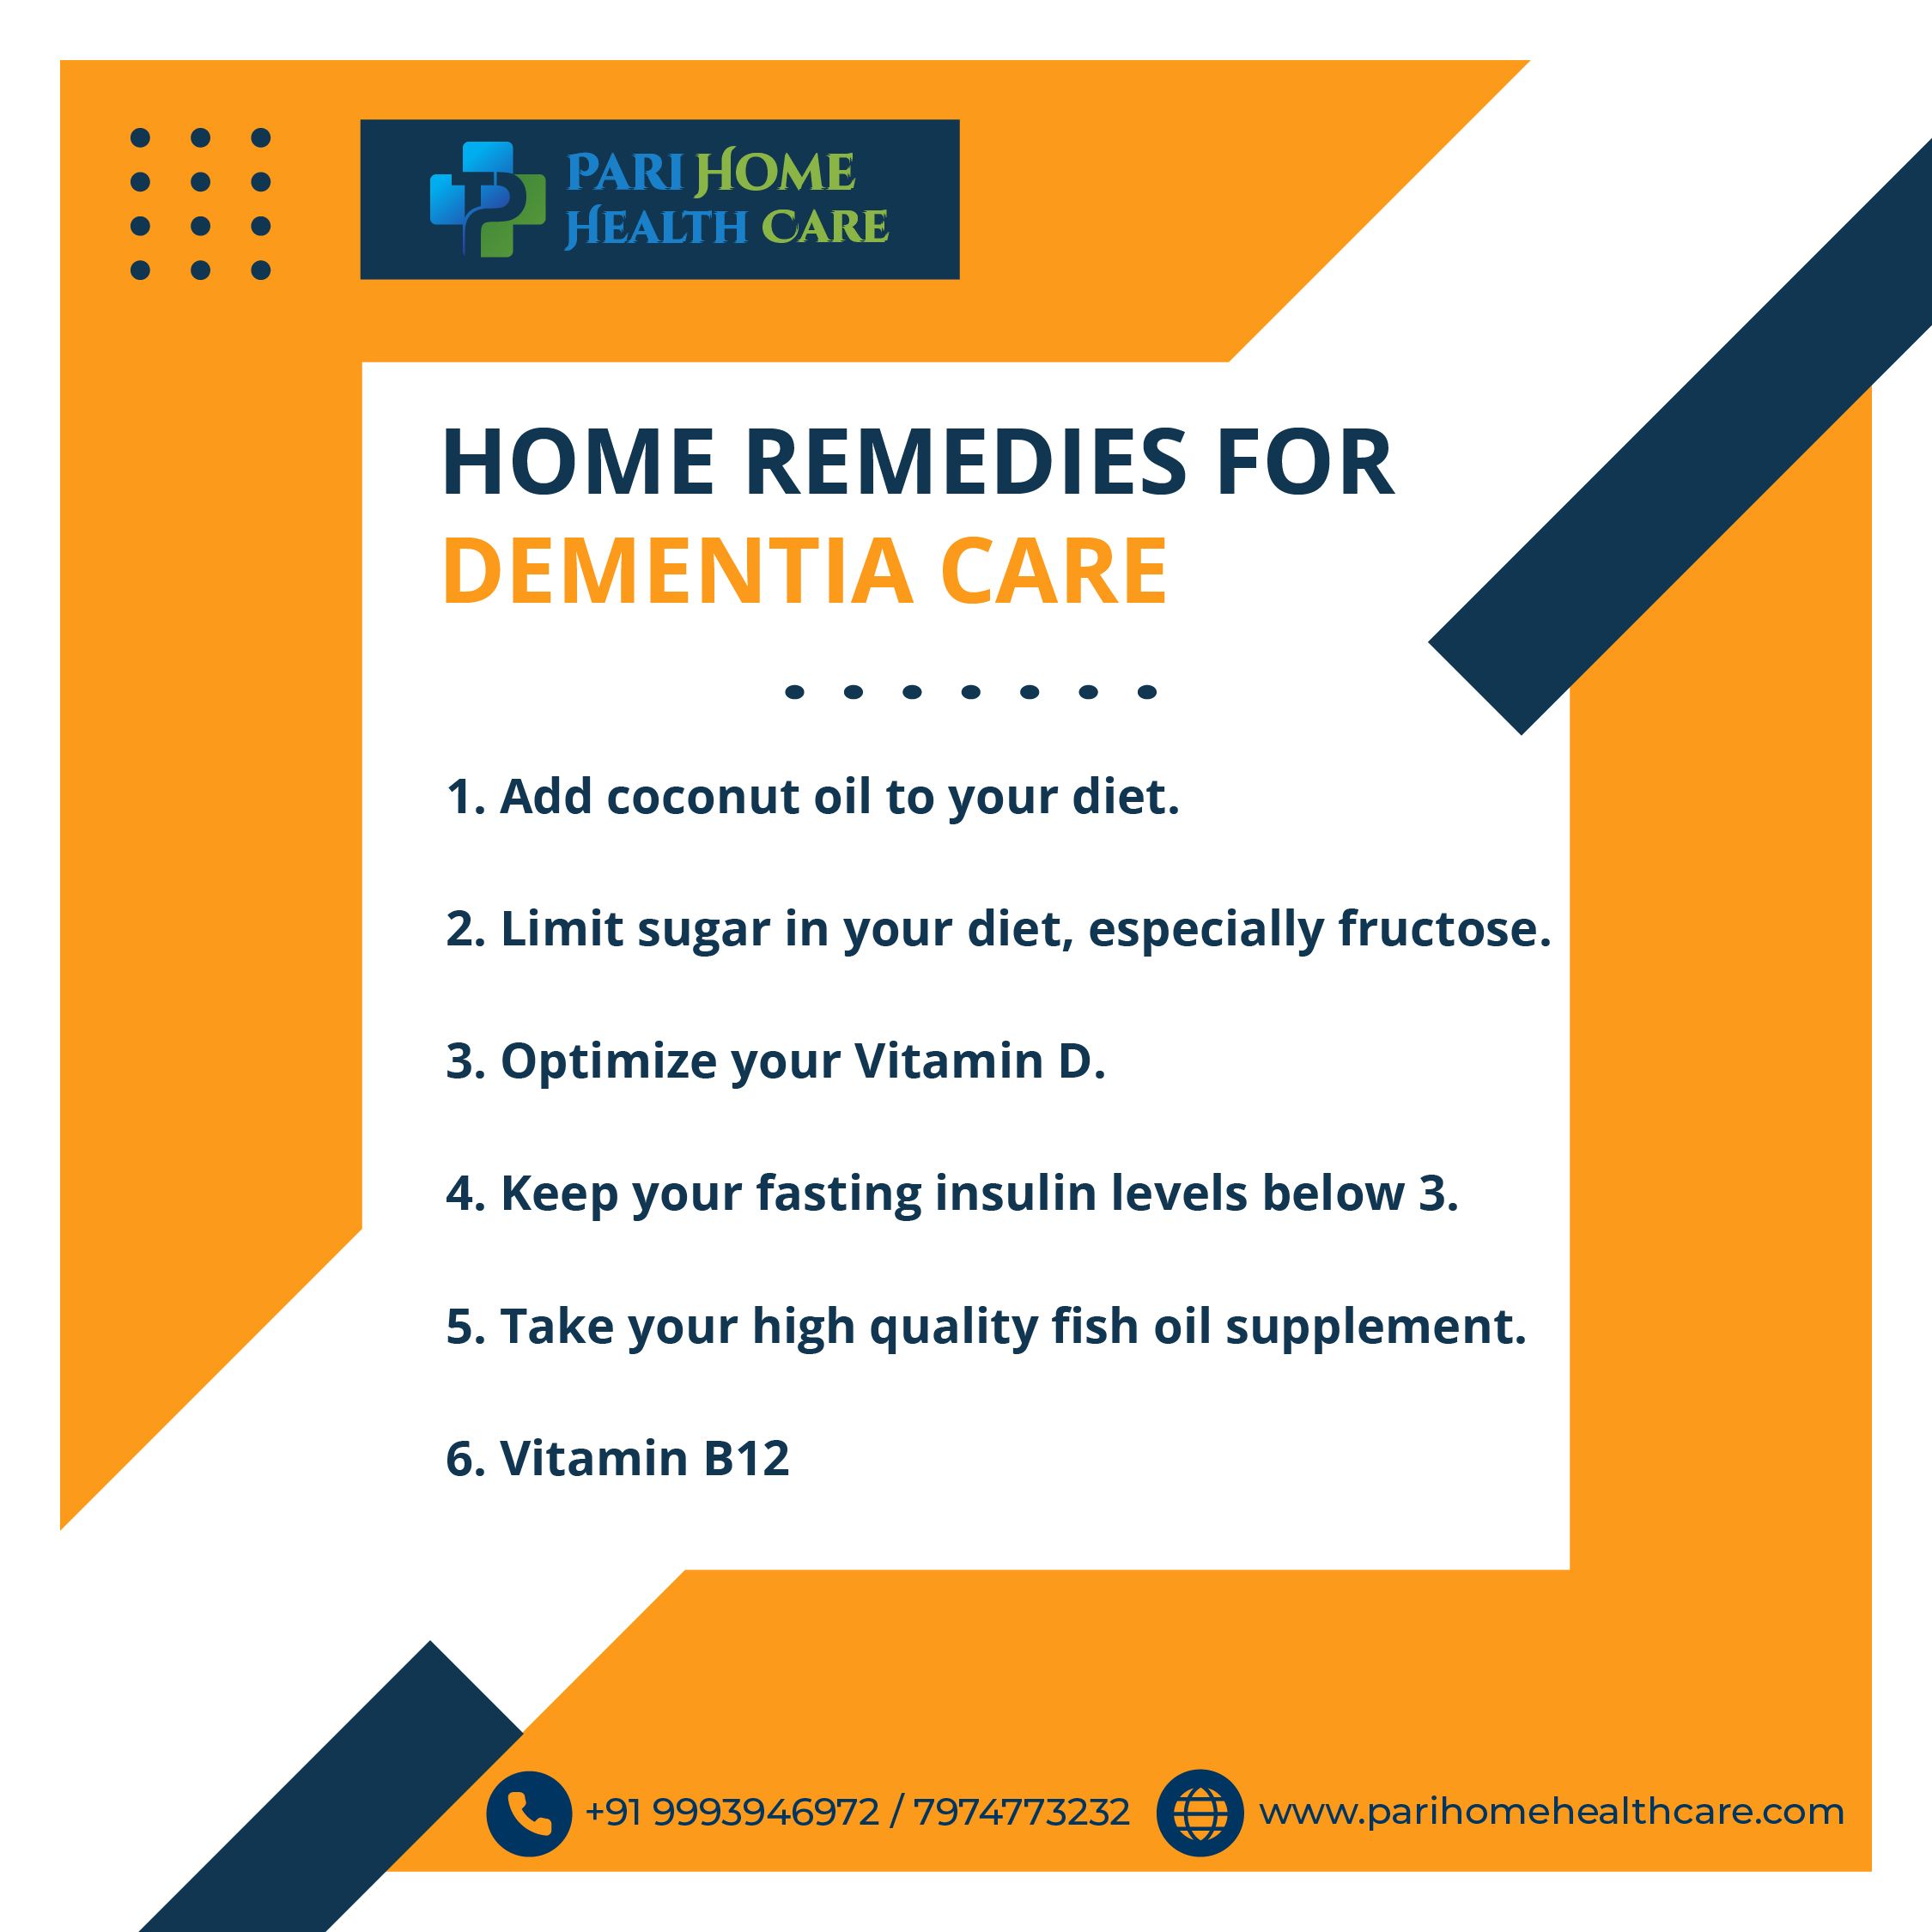 Dementia Care At Your Home By Pari Home Health Care in 2020